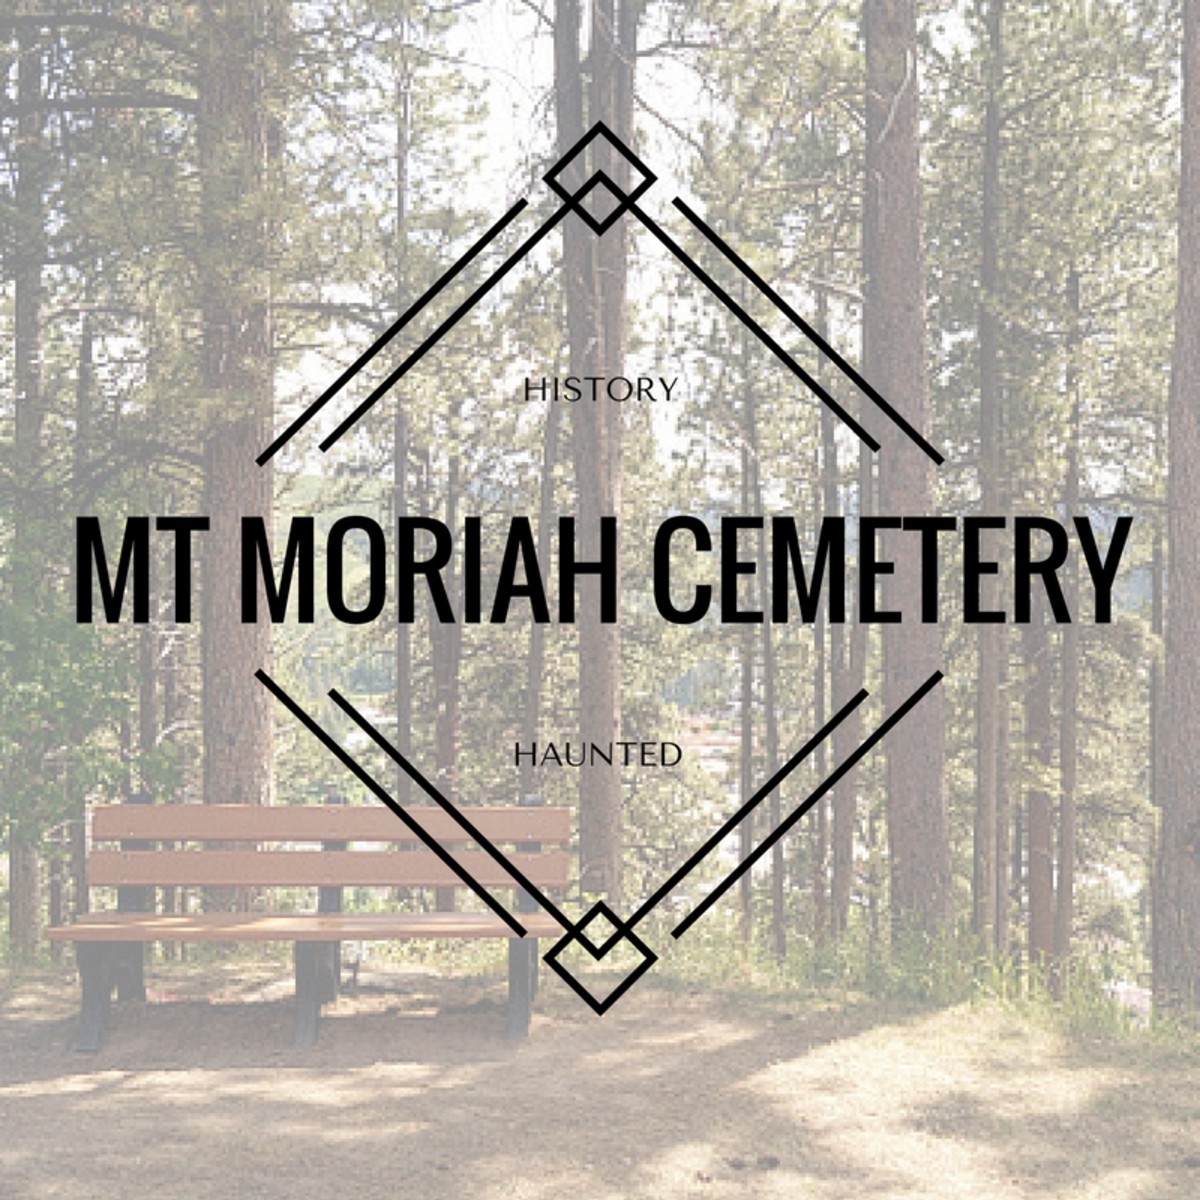 Mt. Moriah Cemetery and a Possible Haunting by Seth Bullock